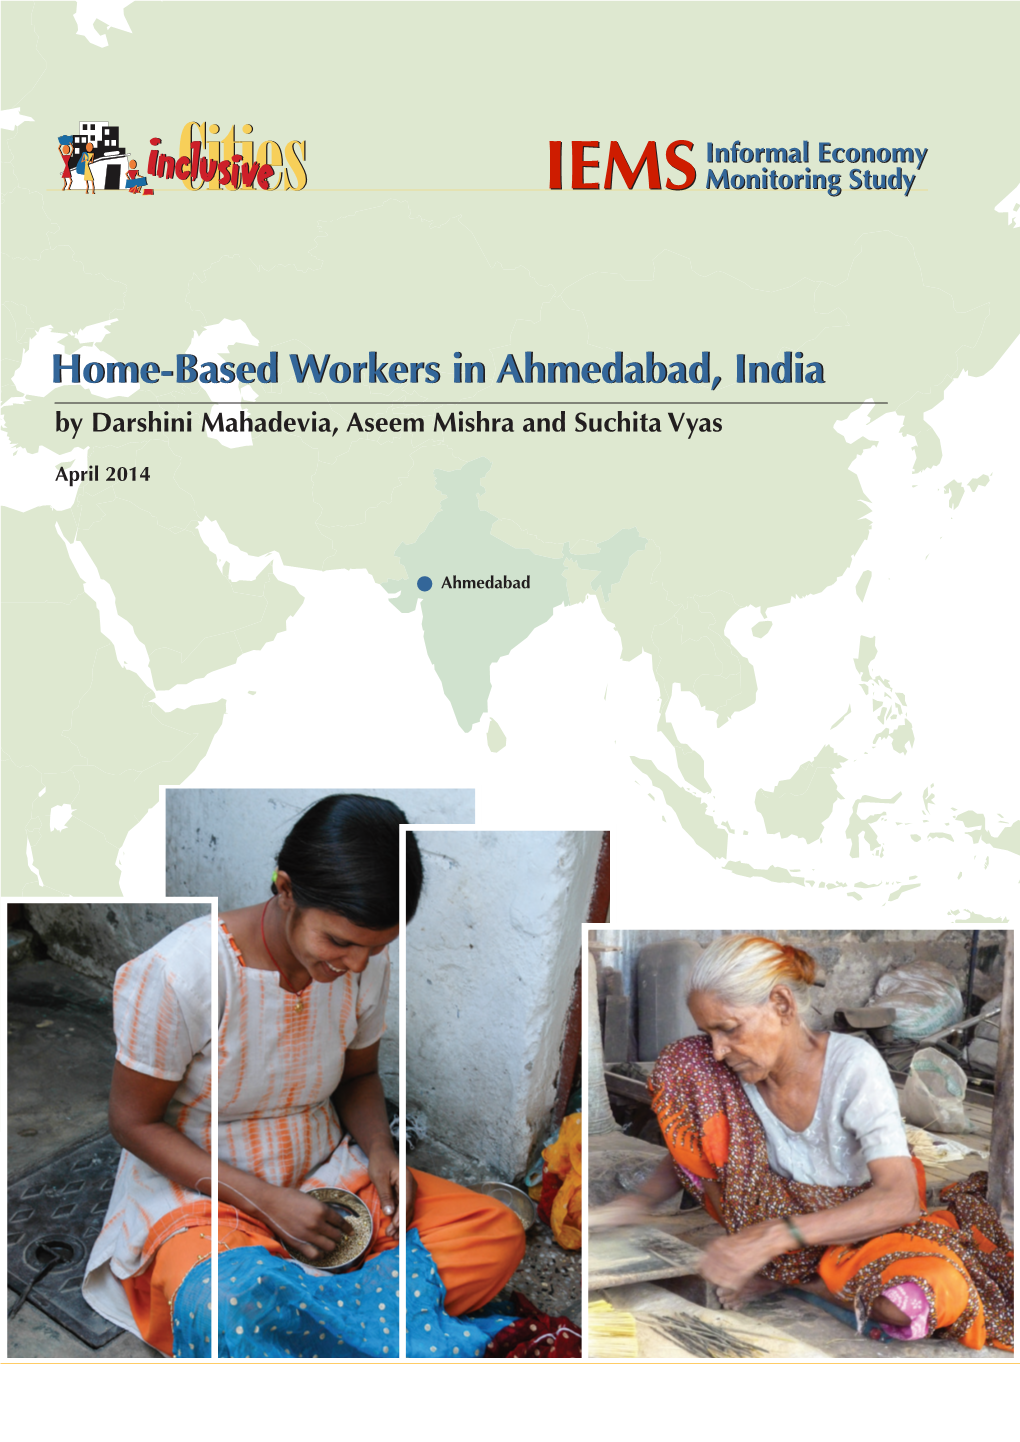 Informal Economy Monitoring Study: Home-Based Workers in Ahmedabad, India